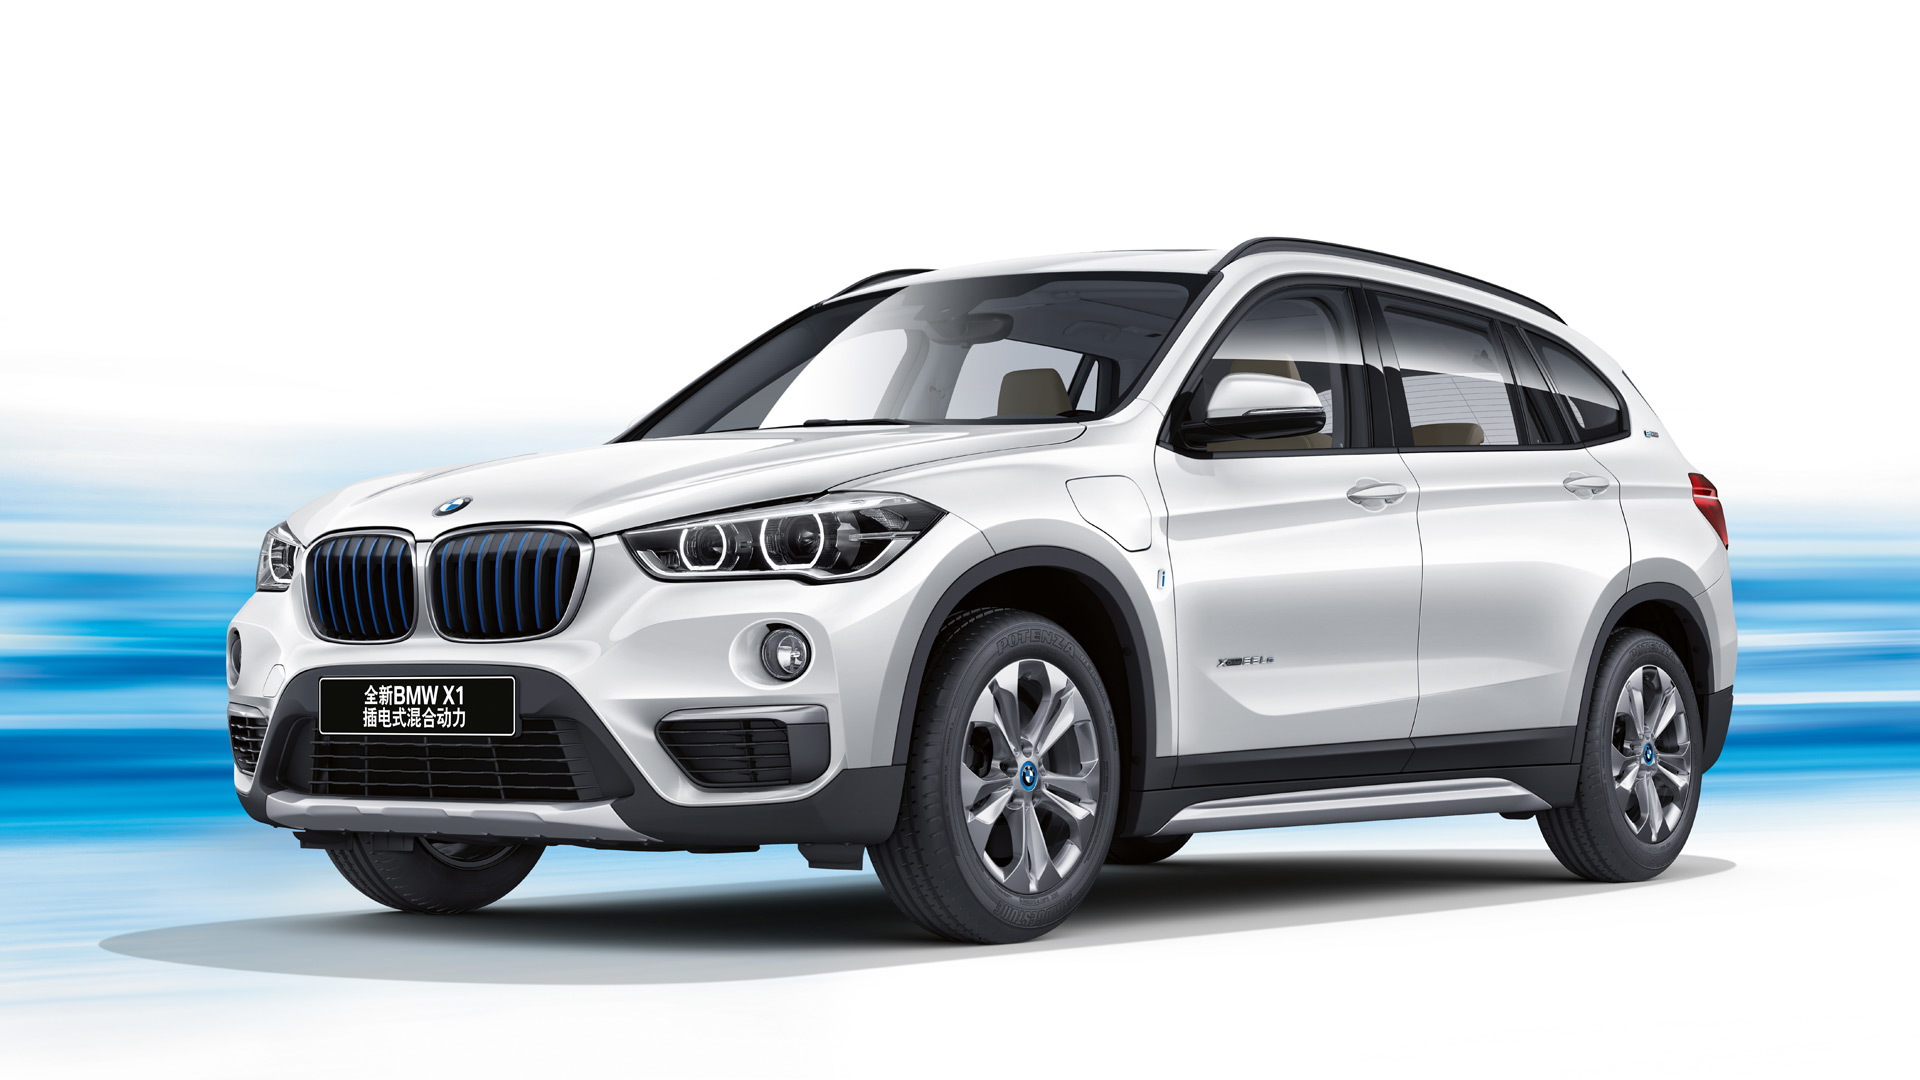 2016 BMW X1 xDrive25Le iPerformance (Chinese spec)